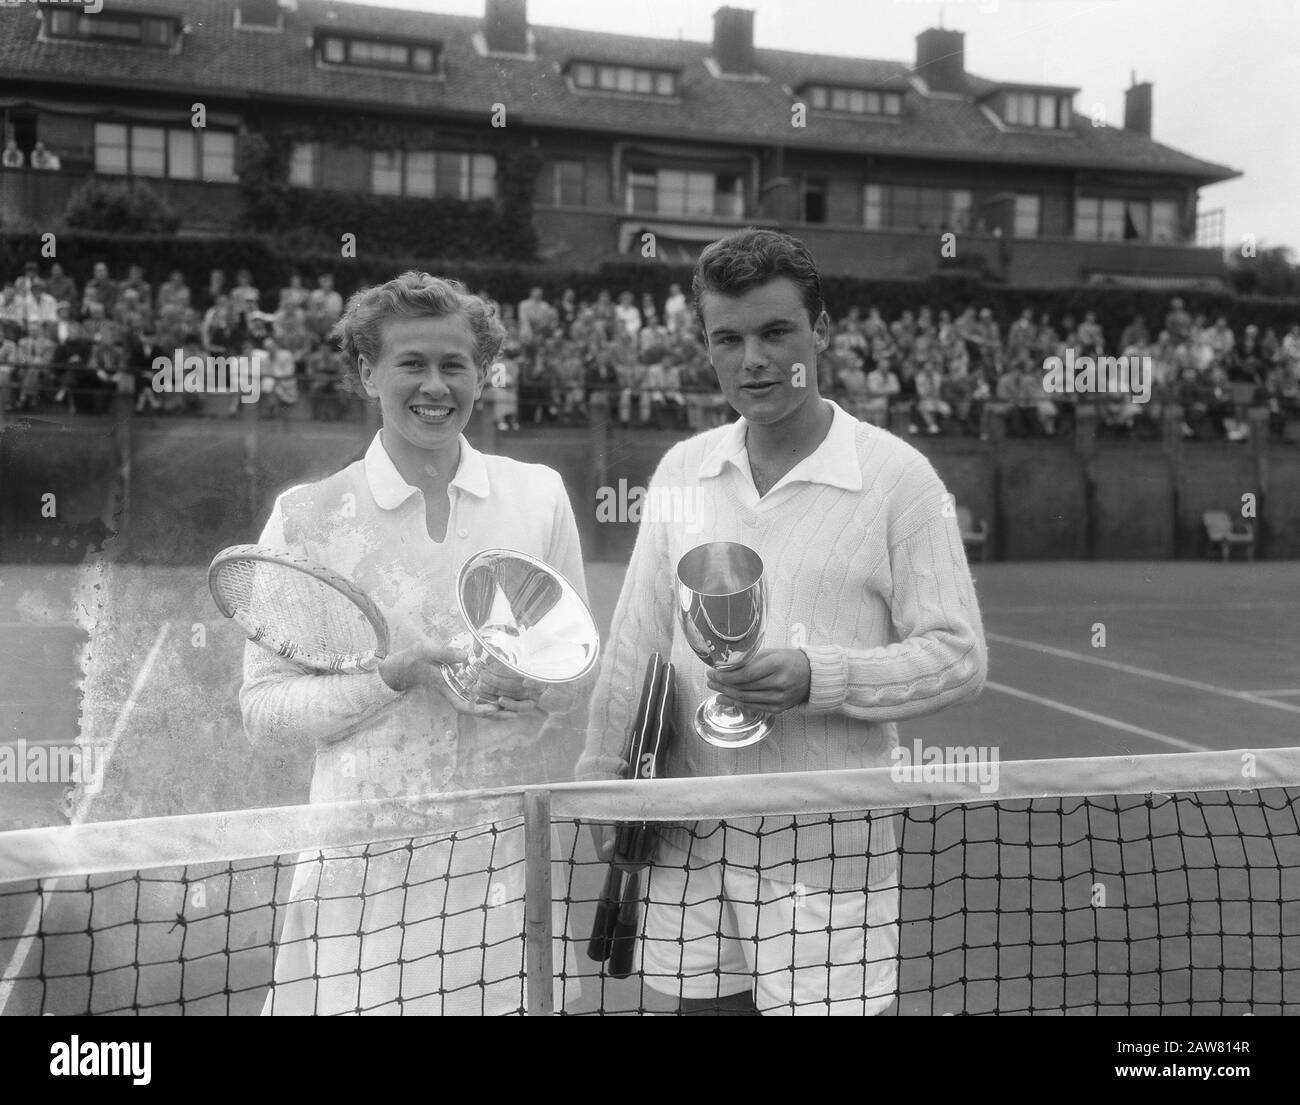 Dutch tennis championships Hague, champion women Ms. Roos, single game  Date: August 22, 1954 Location: The Hague, South Holland Keywords: GAME,  champion, tennis championships Person Name : Rose Stock Photo - Alamy